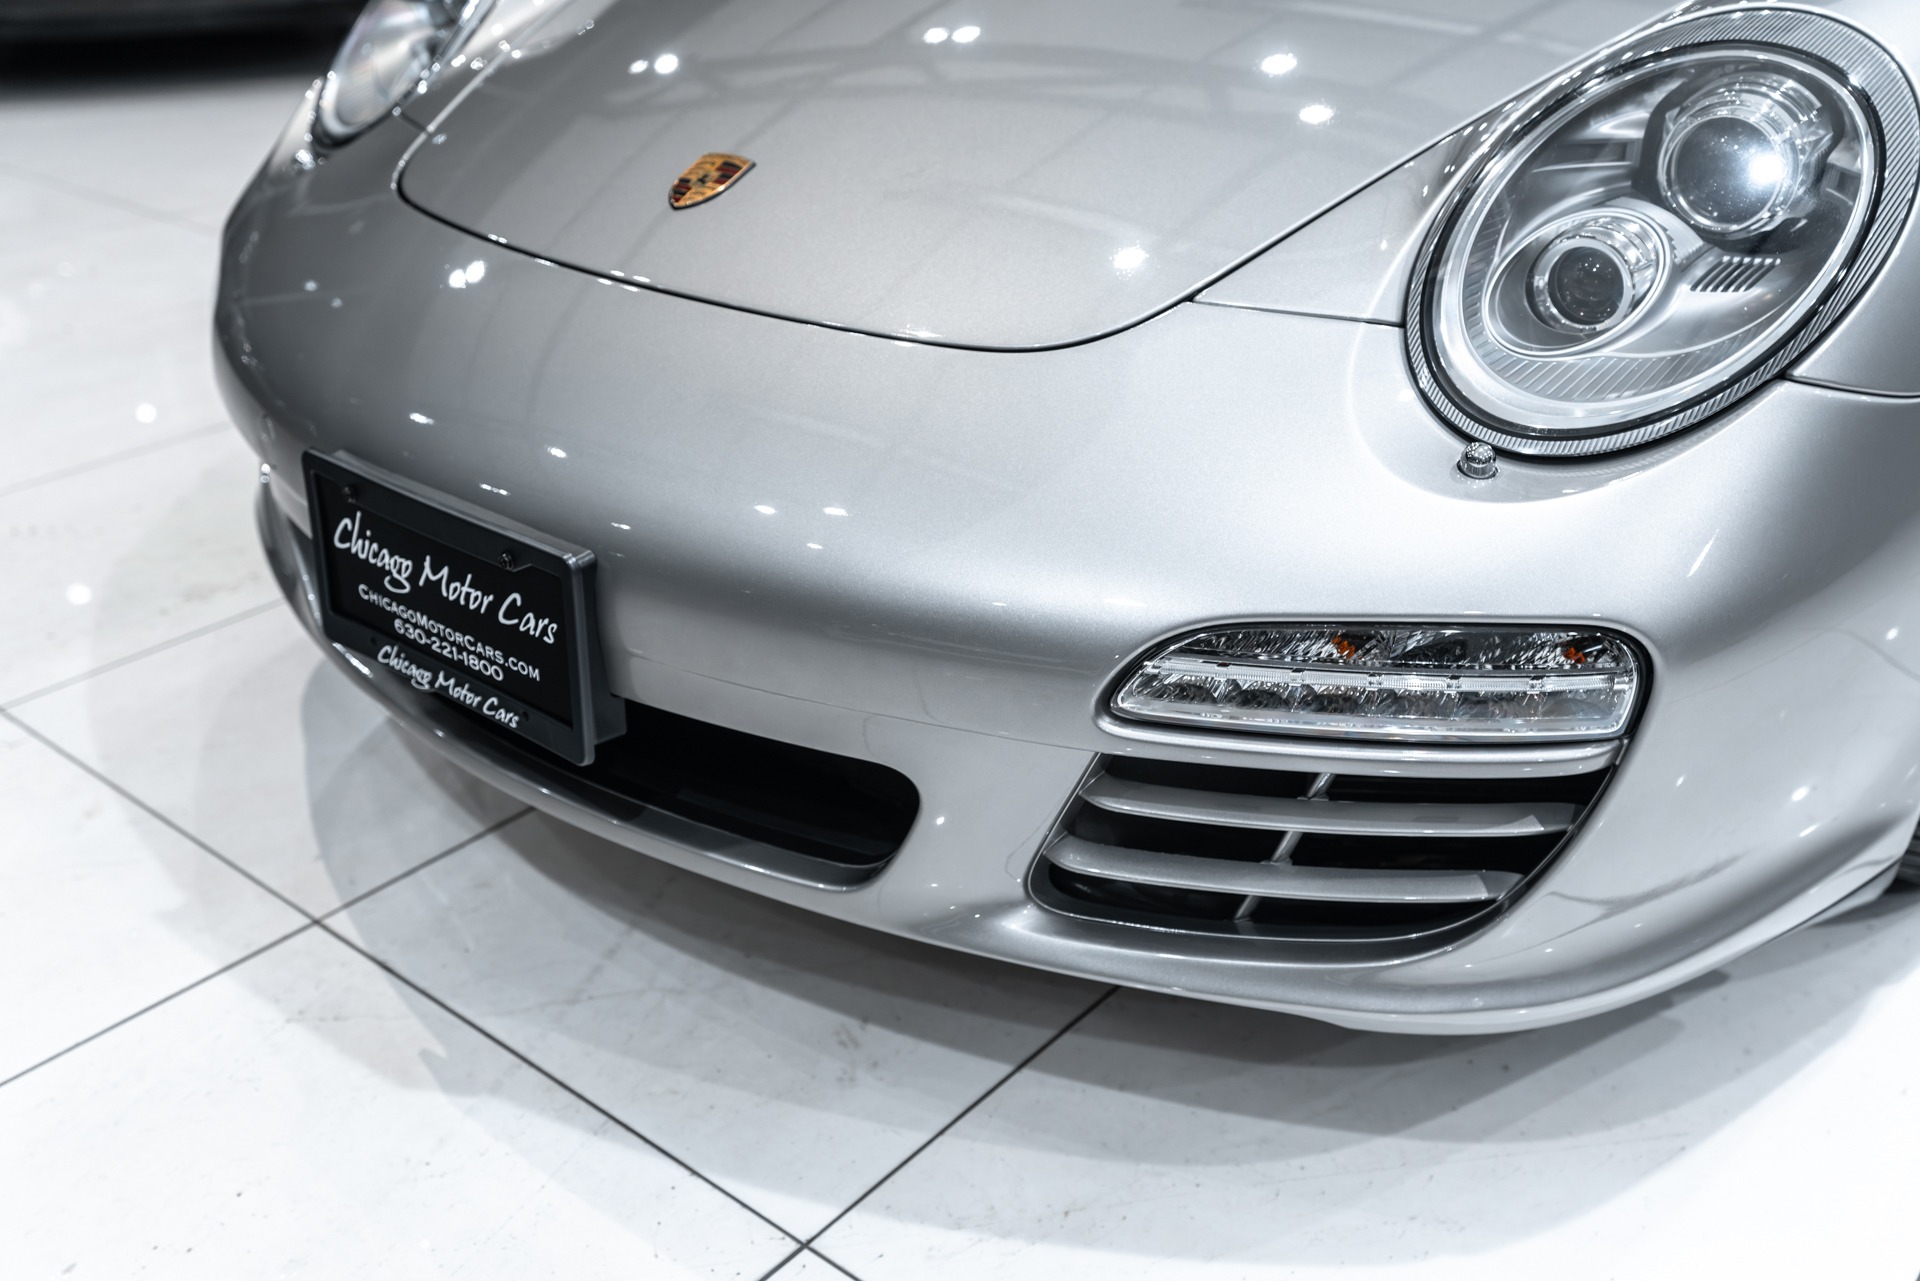 Used-2012-Porsche-911-Targa-4S-PDK-AWD-Sport-Chrono-Clear-Tail-lights-Excellent-Condition